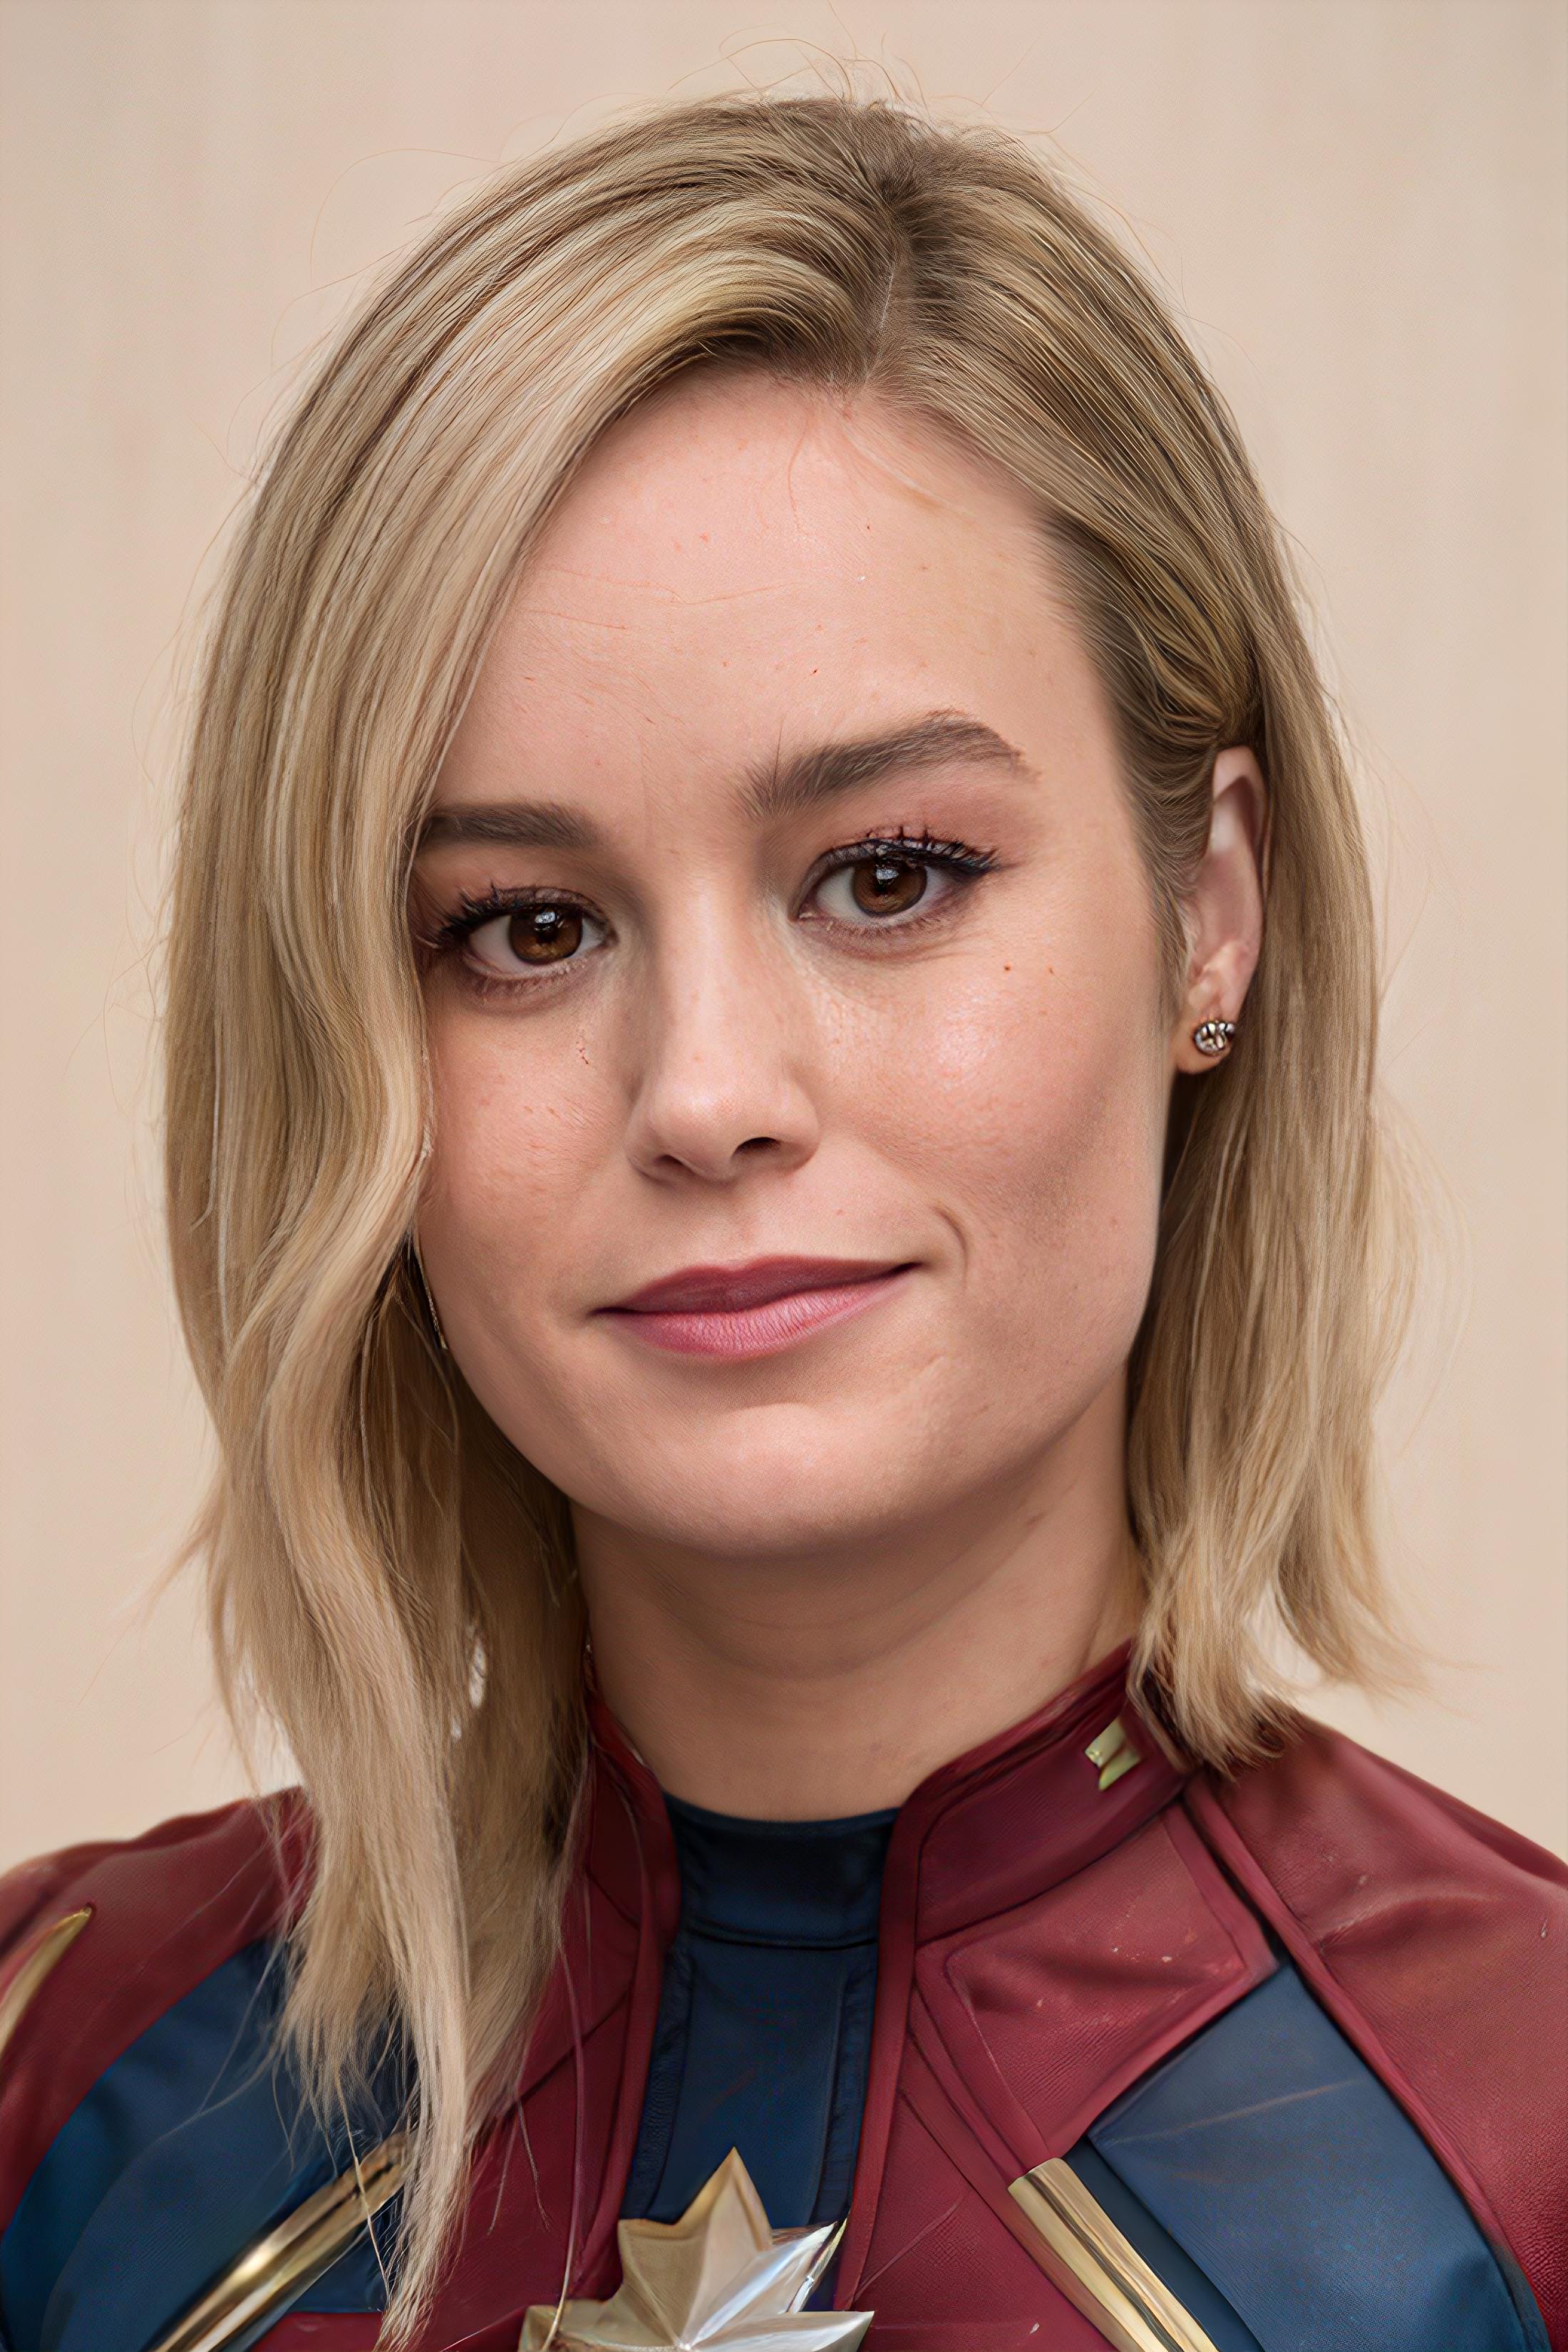 Brie Larson image by __2_